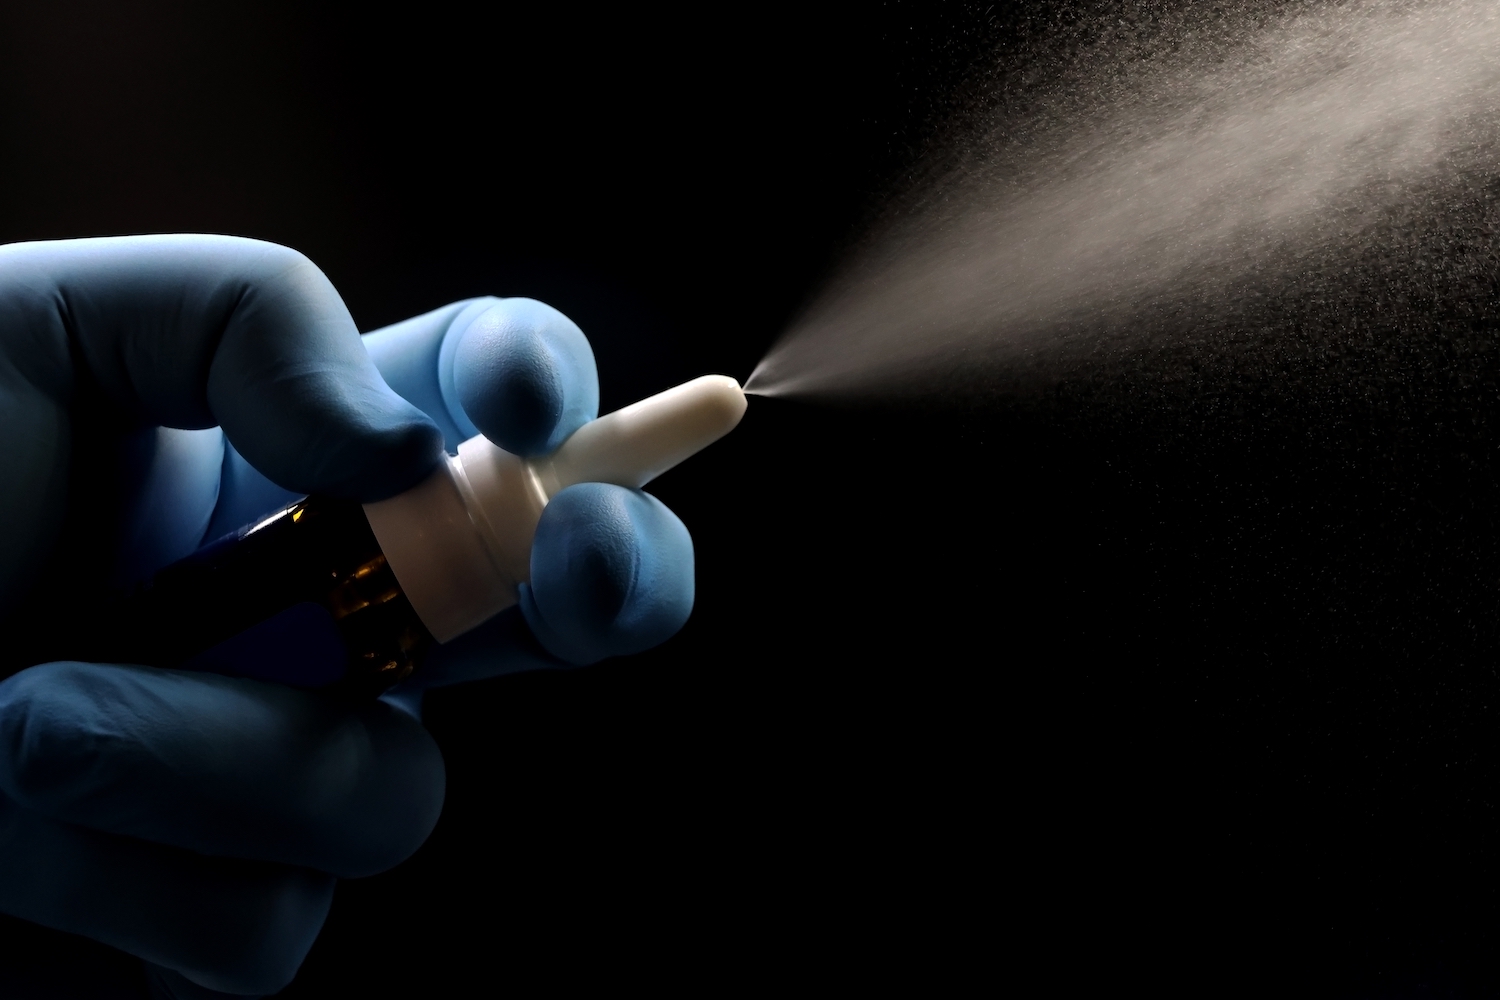 a hand squeezes a bottle of vaccine projecting mist spray, on a black background 